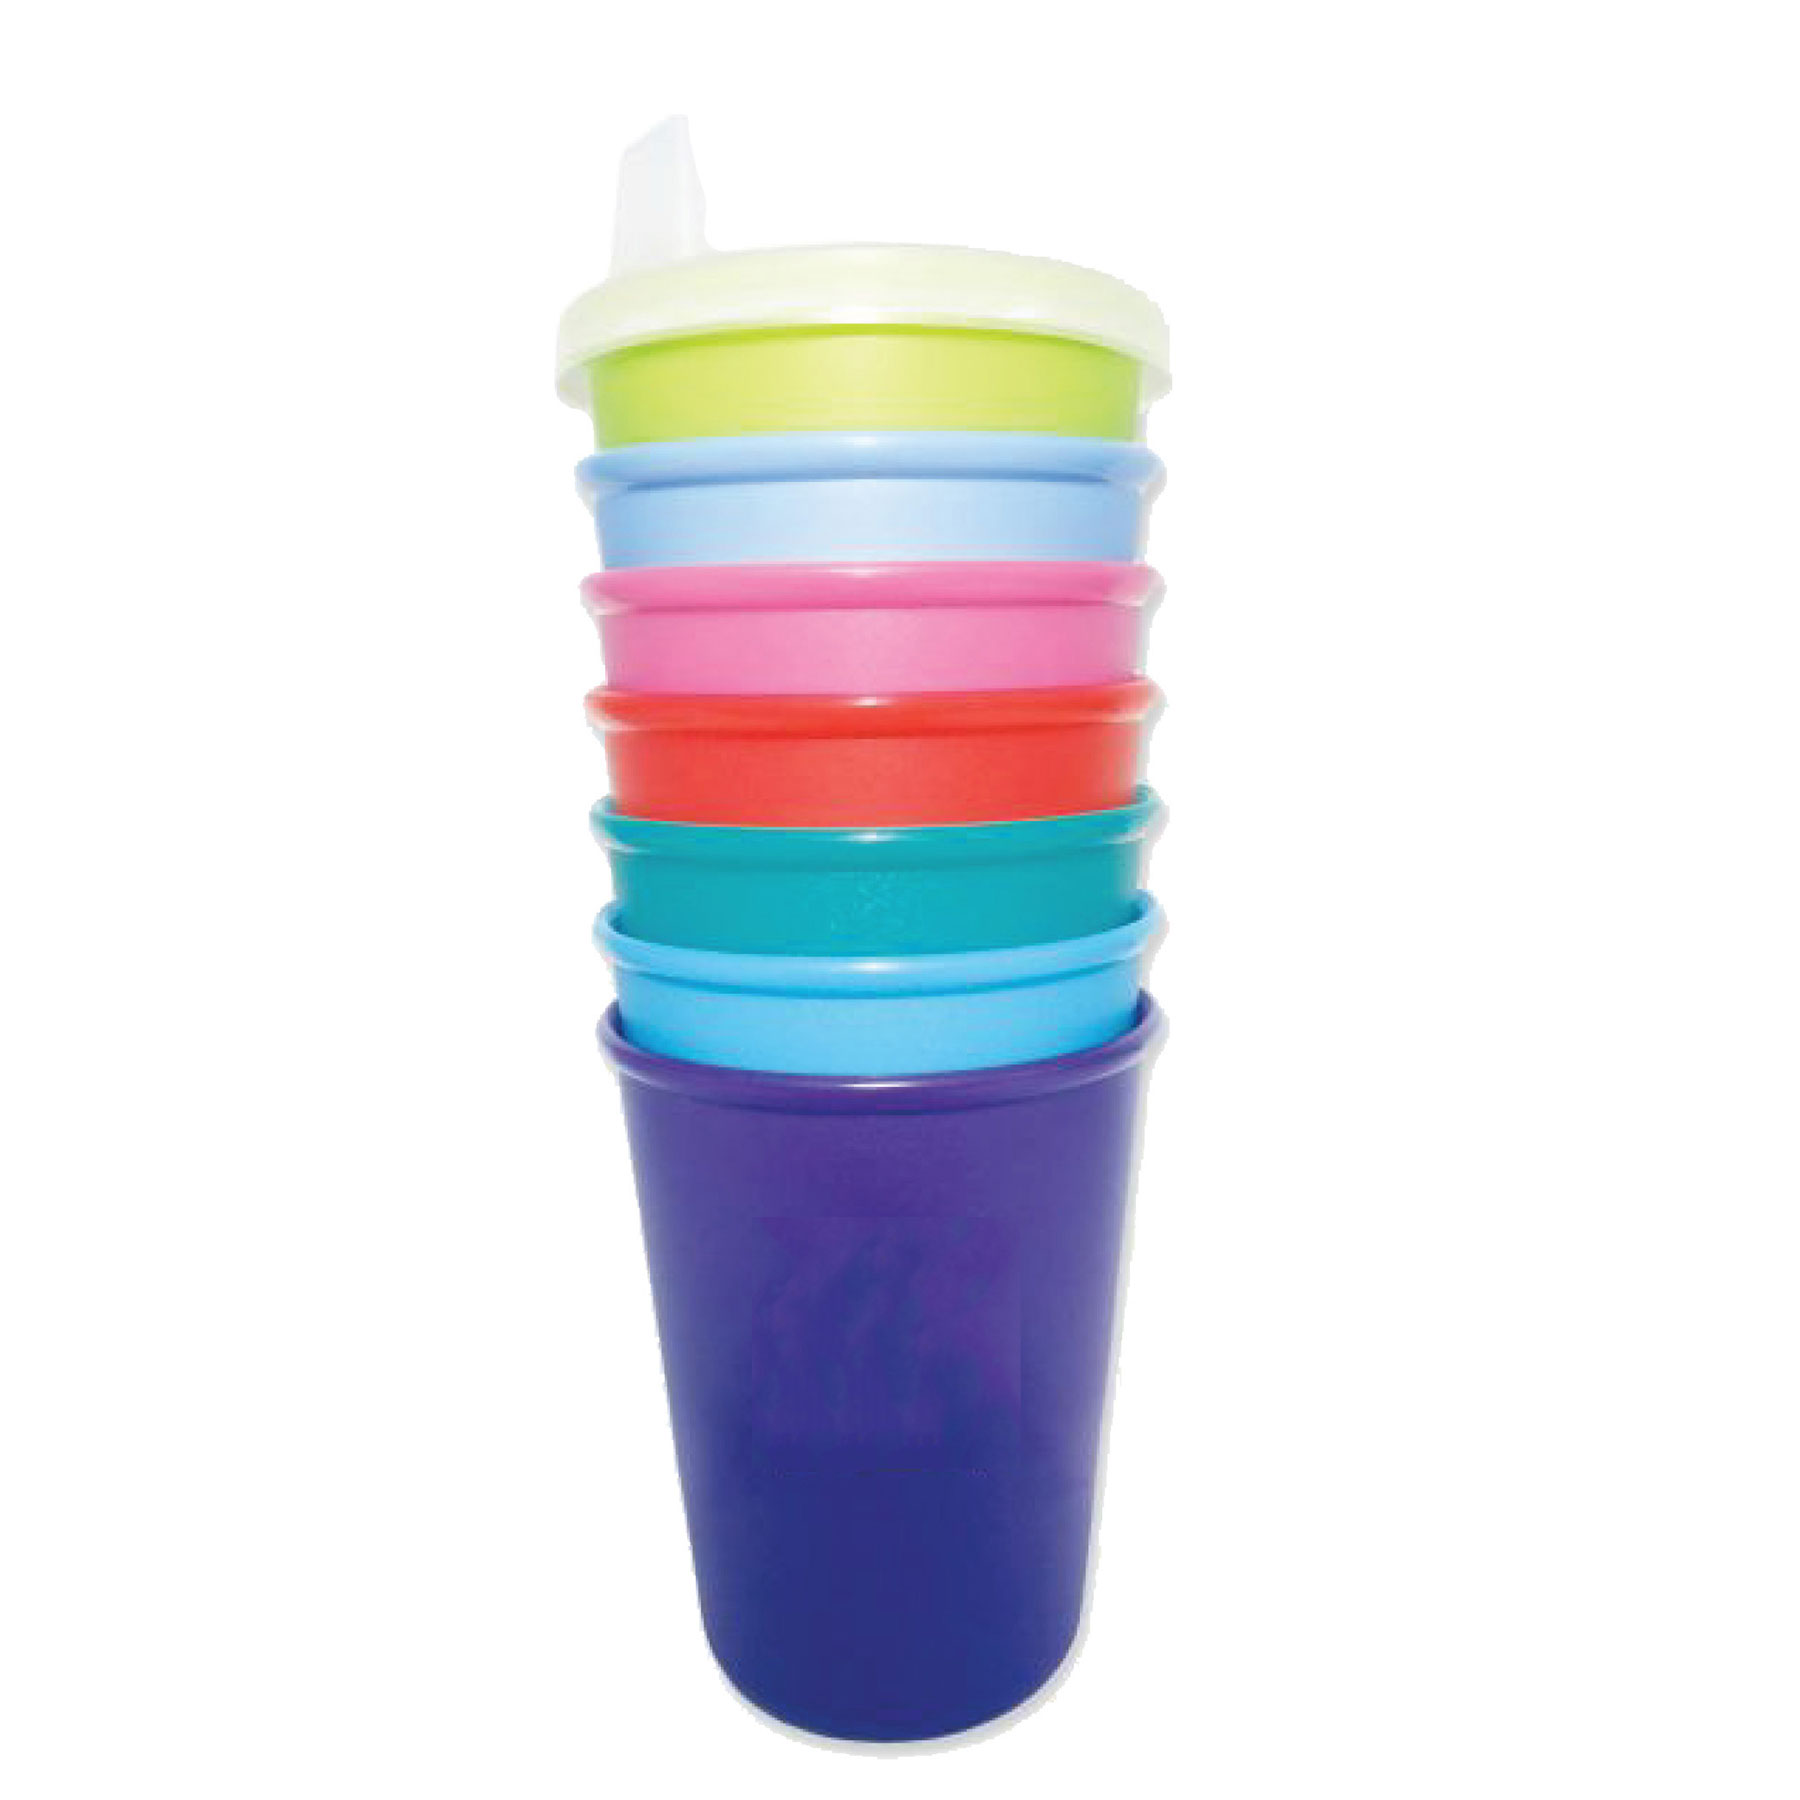 CUSTOM 7oz SIPPY CUP WITH LID